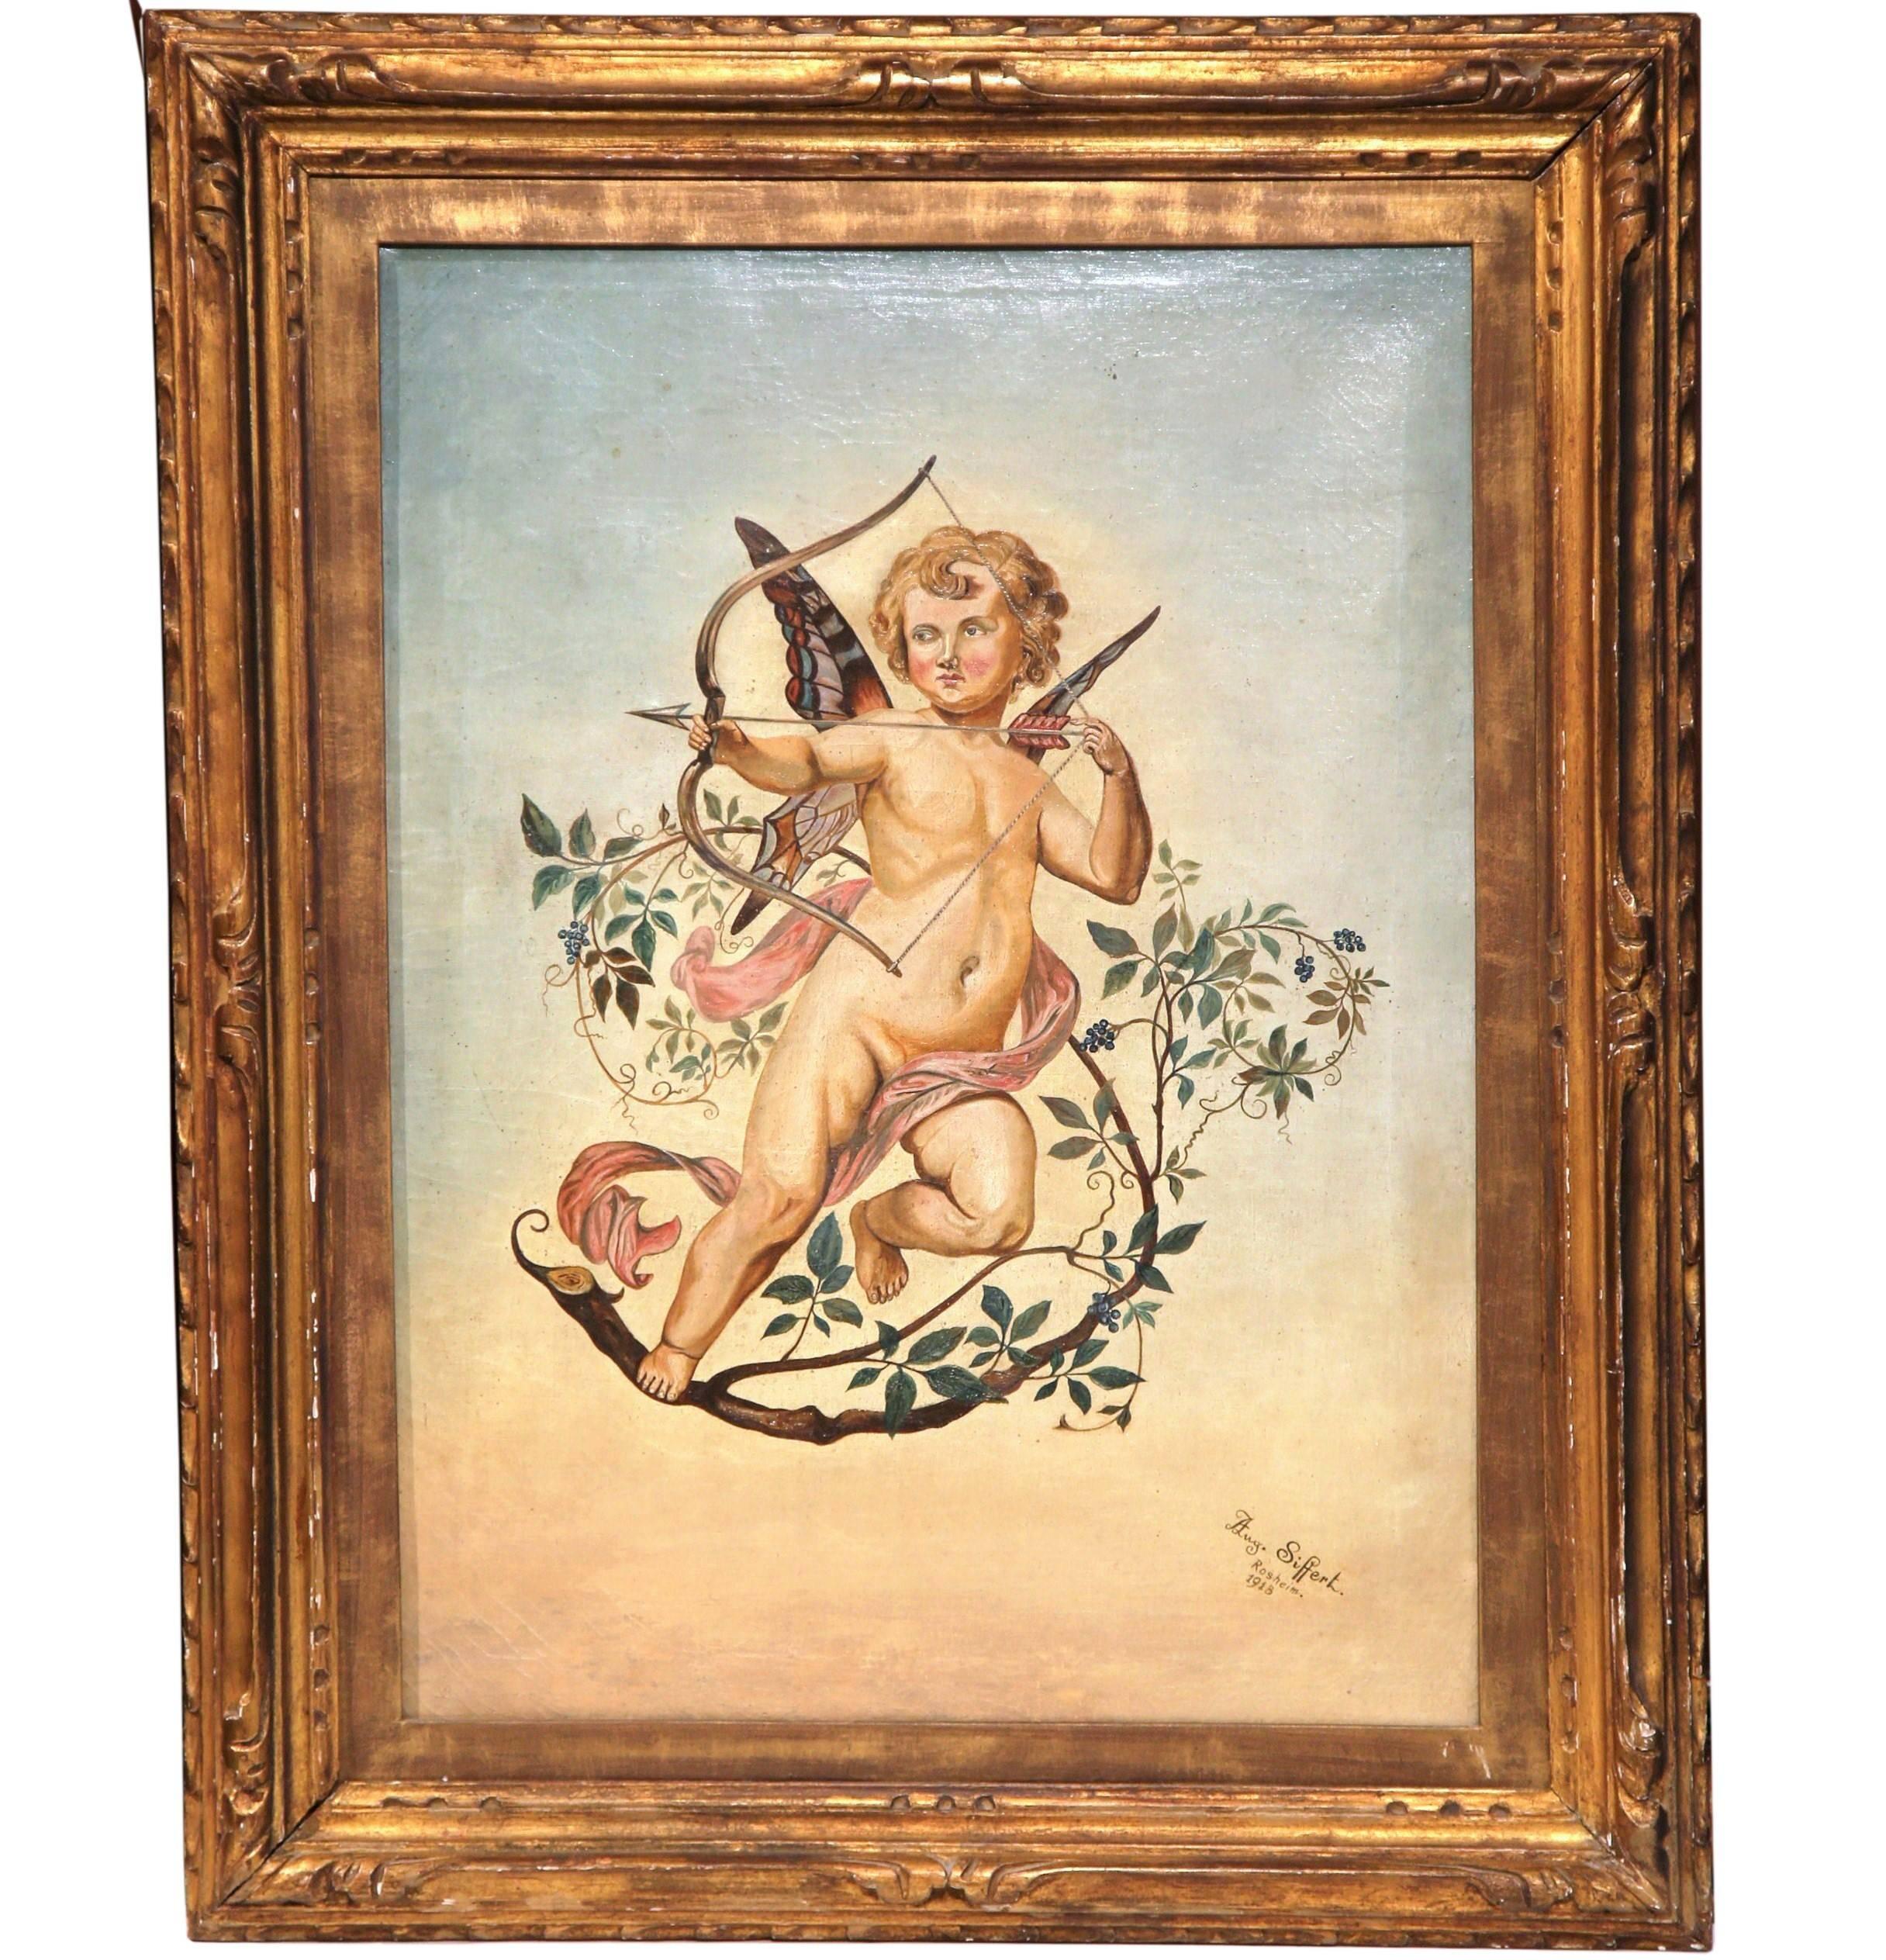 Unknown Figurative Painting - Early 20th Century French Oil Painting in Gilt Frame Signed & Dated Siffert 1913